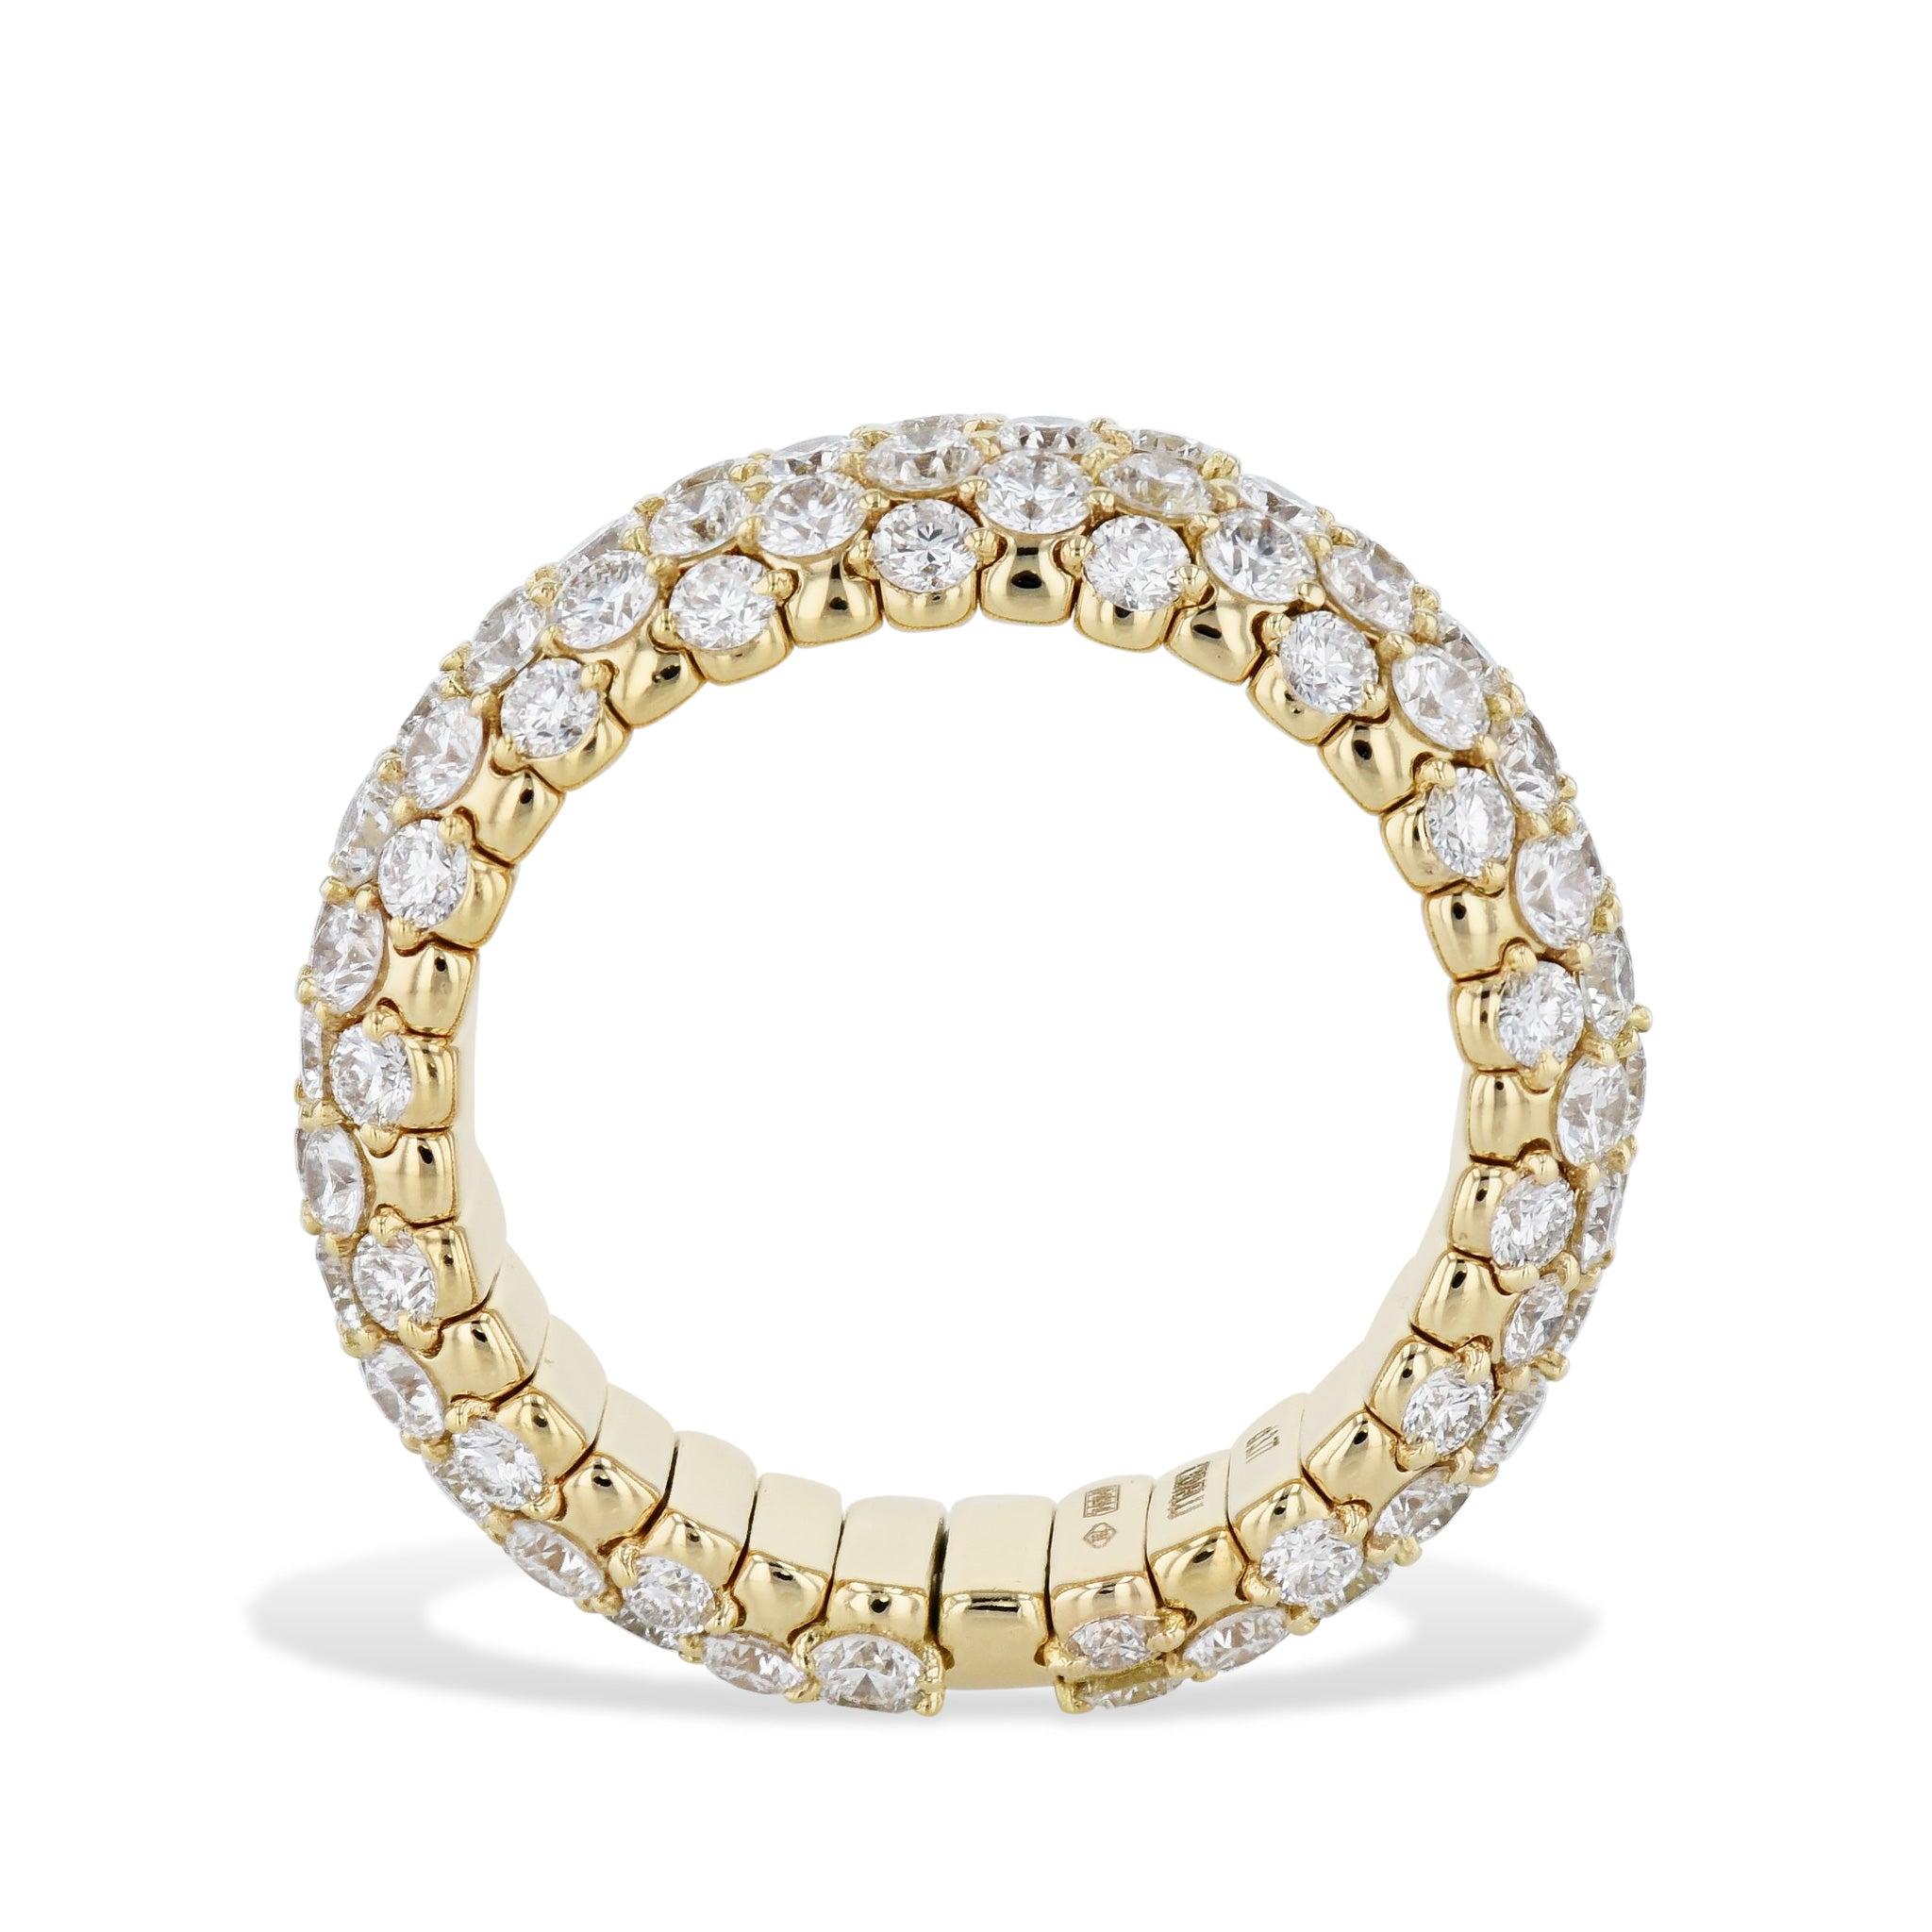 This delightful 18kt gold stretch ring features 3.80cts of sparkling round diamonds, in a tasteful and classic look. The expanding stretching action makes this ring easy and comfortable to slip on and off, while its outstanding manufacturing ensures